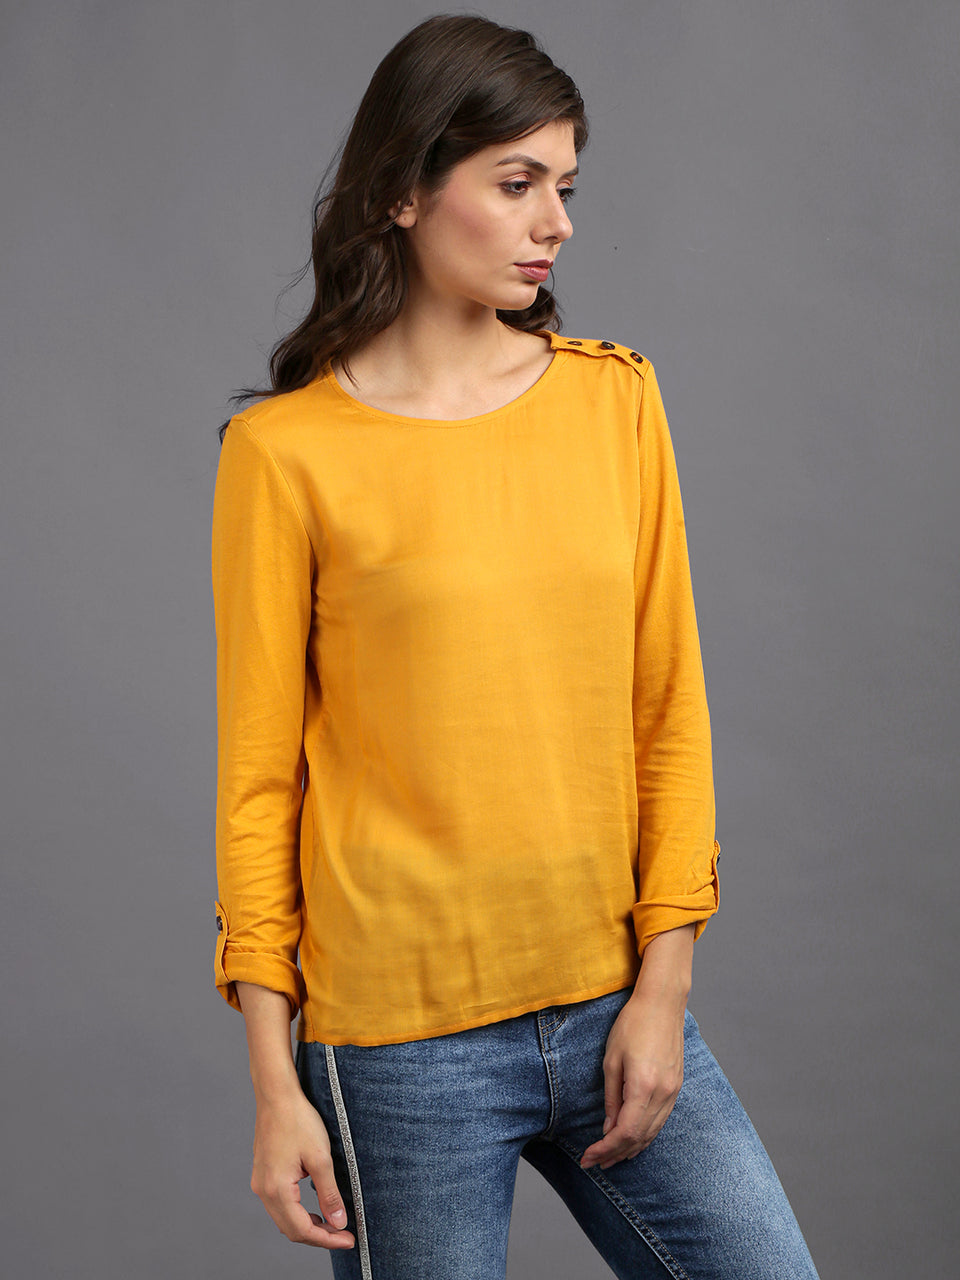 women solid yellow casual tops